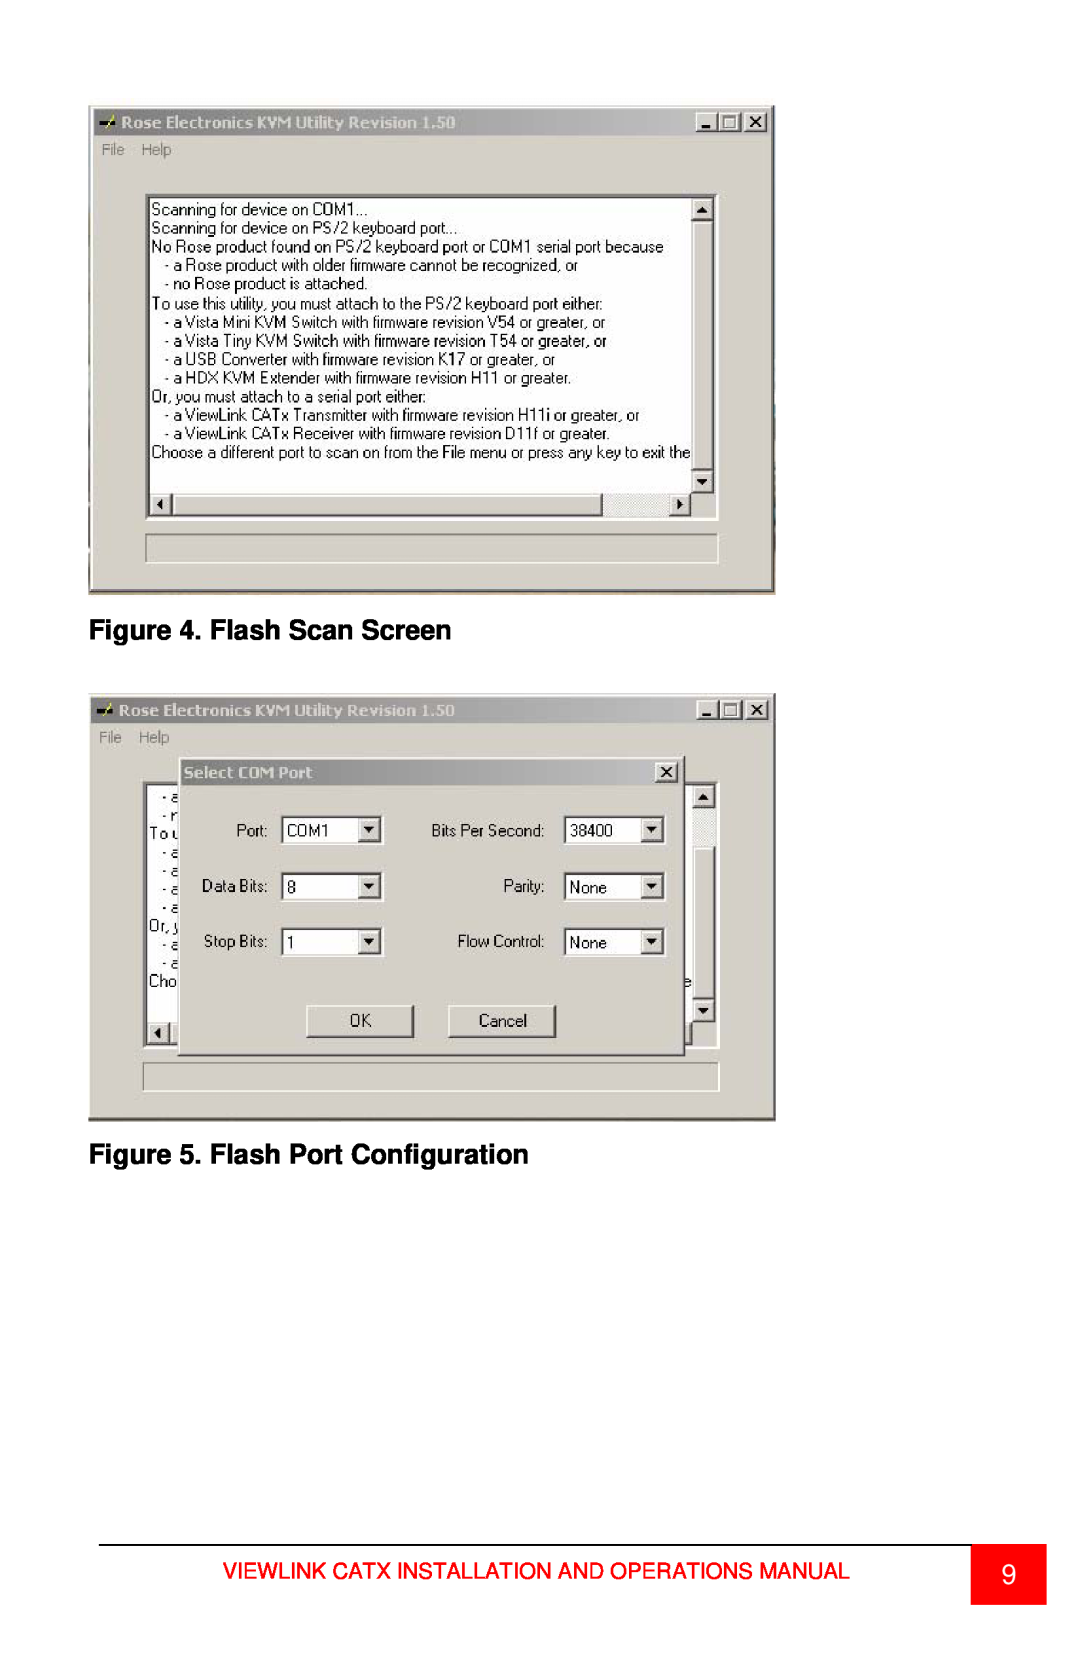 Rose electronic CATx manual Flash Scan Screen . Flash Port Configuration, Viewlink Catx Installation And Operations Manual 